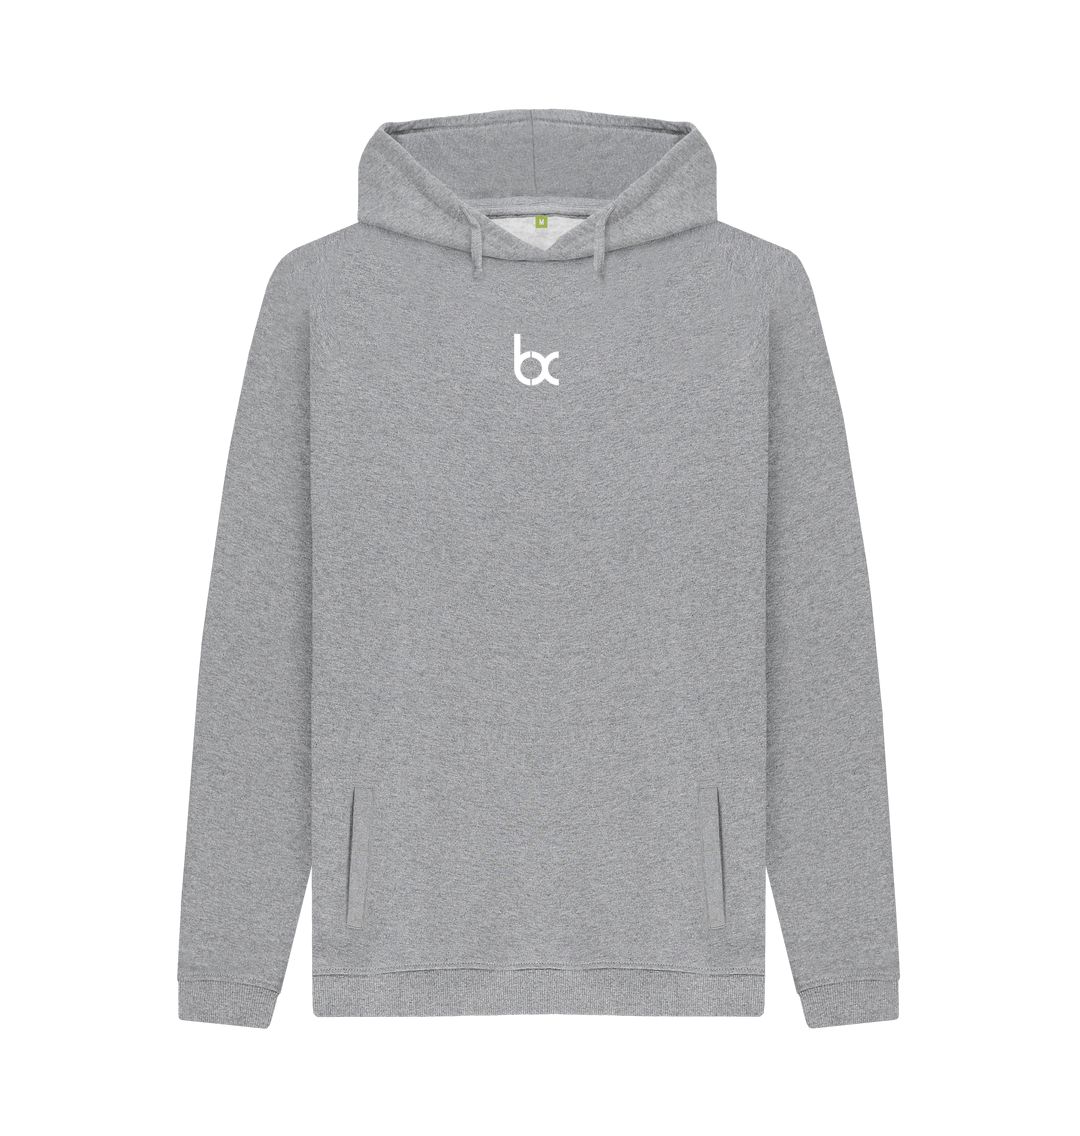 Light Heather BX Hoodie - with white logo